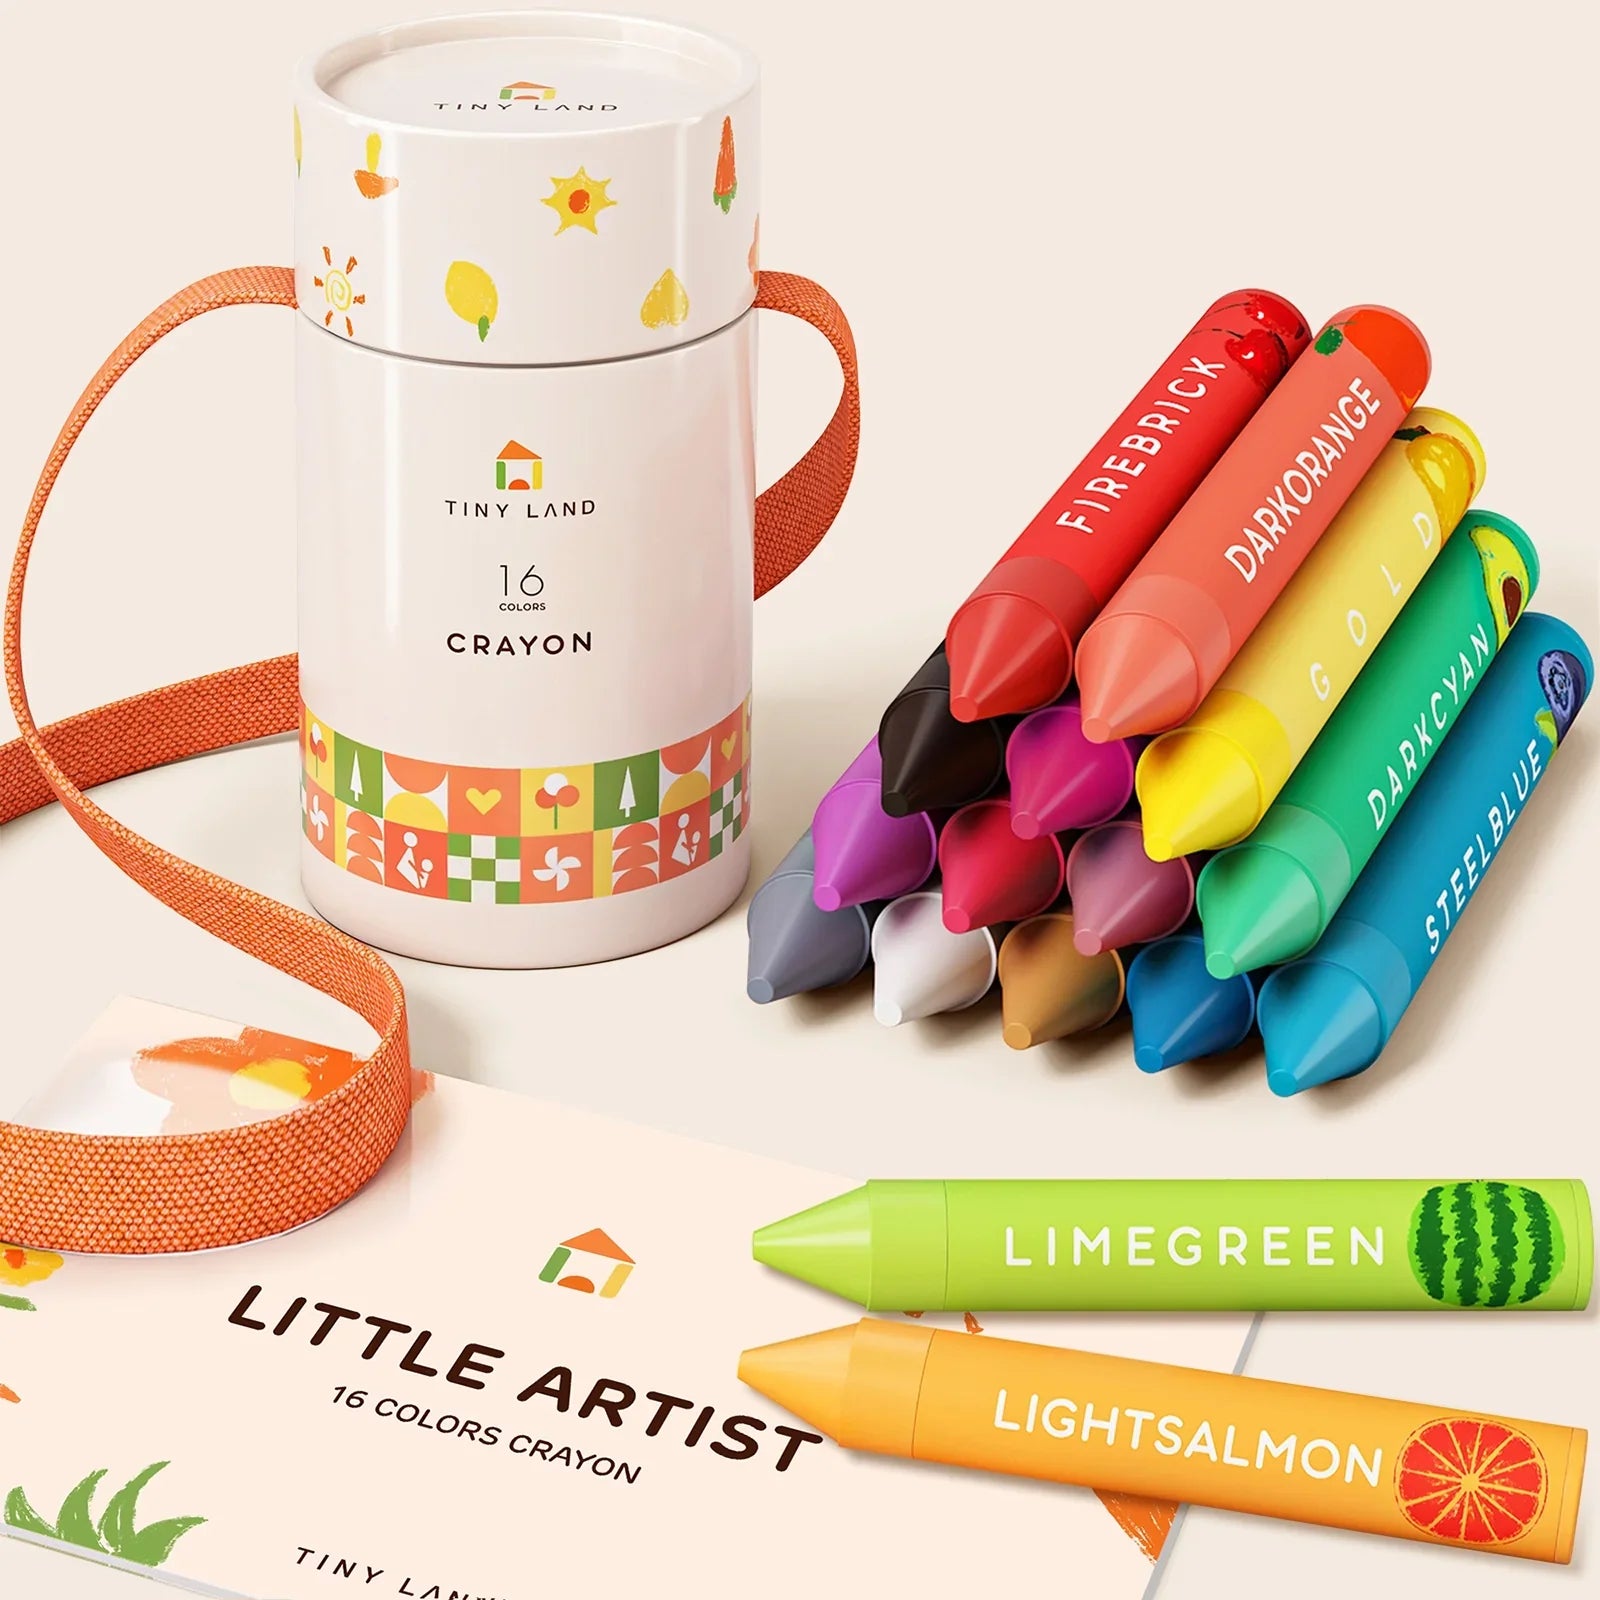 large crayons for kids ages 2-4